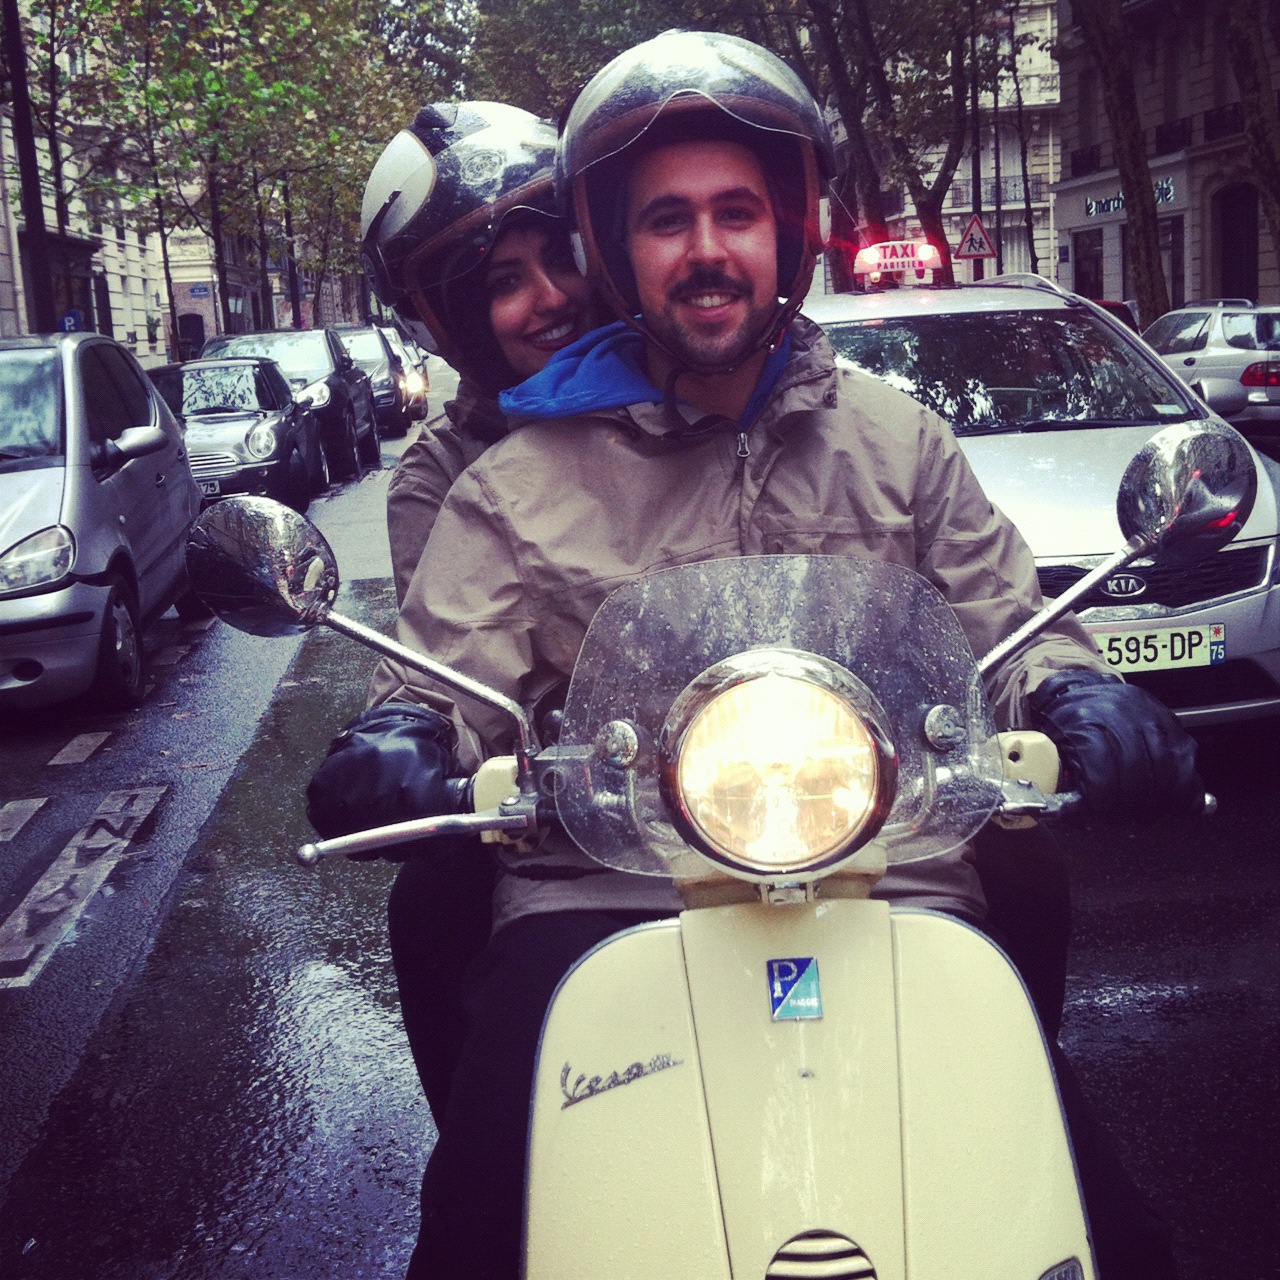 Streets of Paris by Vespa scooter during a Paris sightseeing tour.